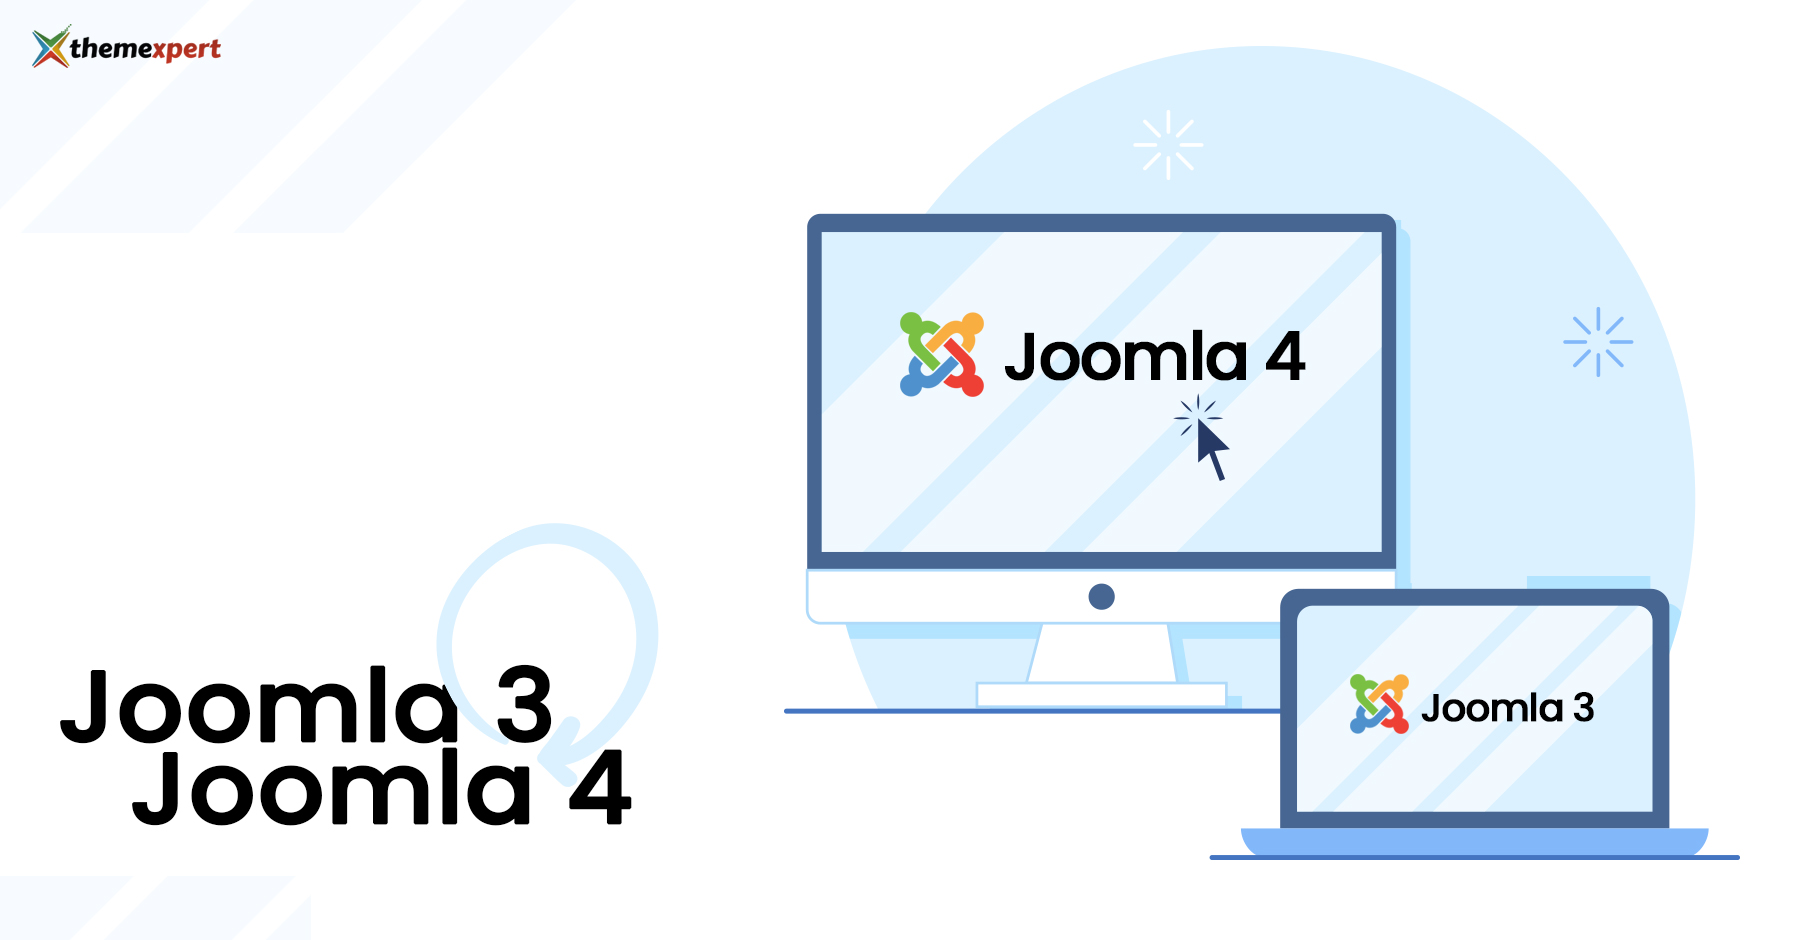 How to Migrate Joomla 3 to Joomla 4: Step by Step Guide